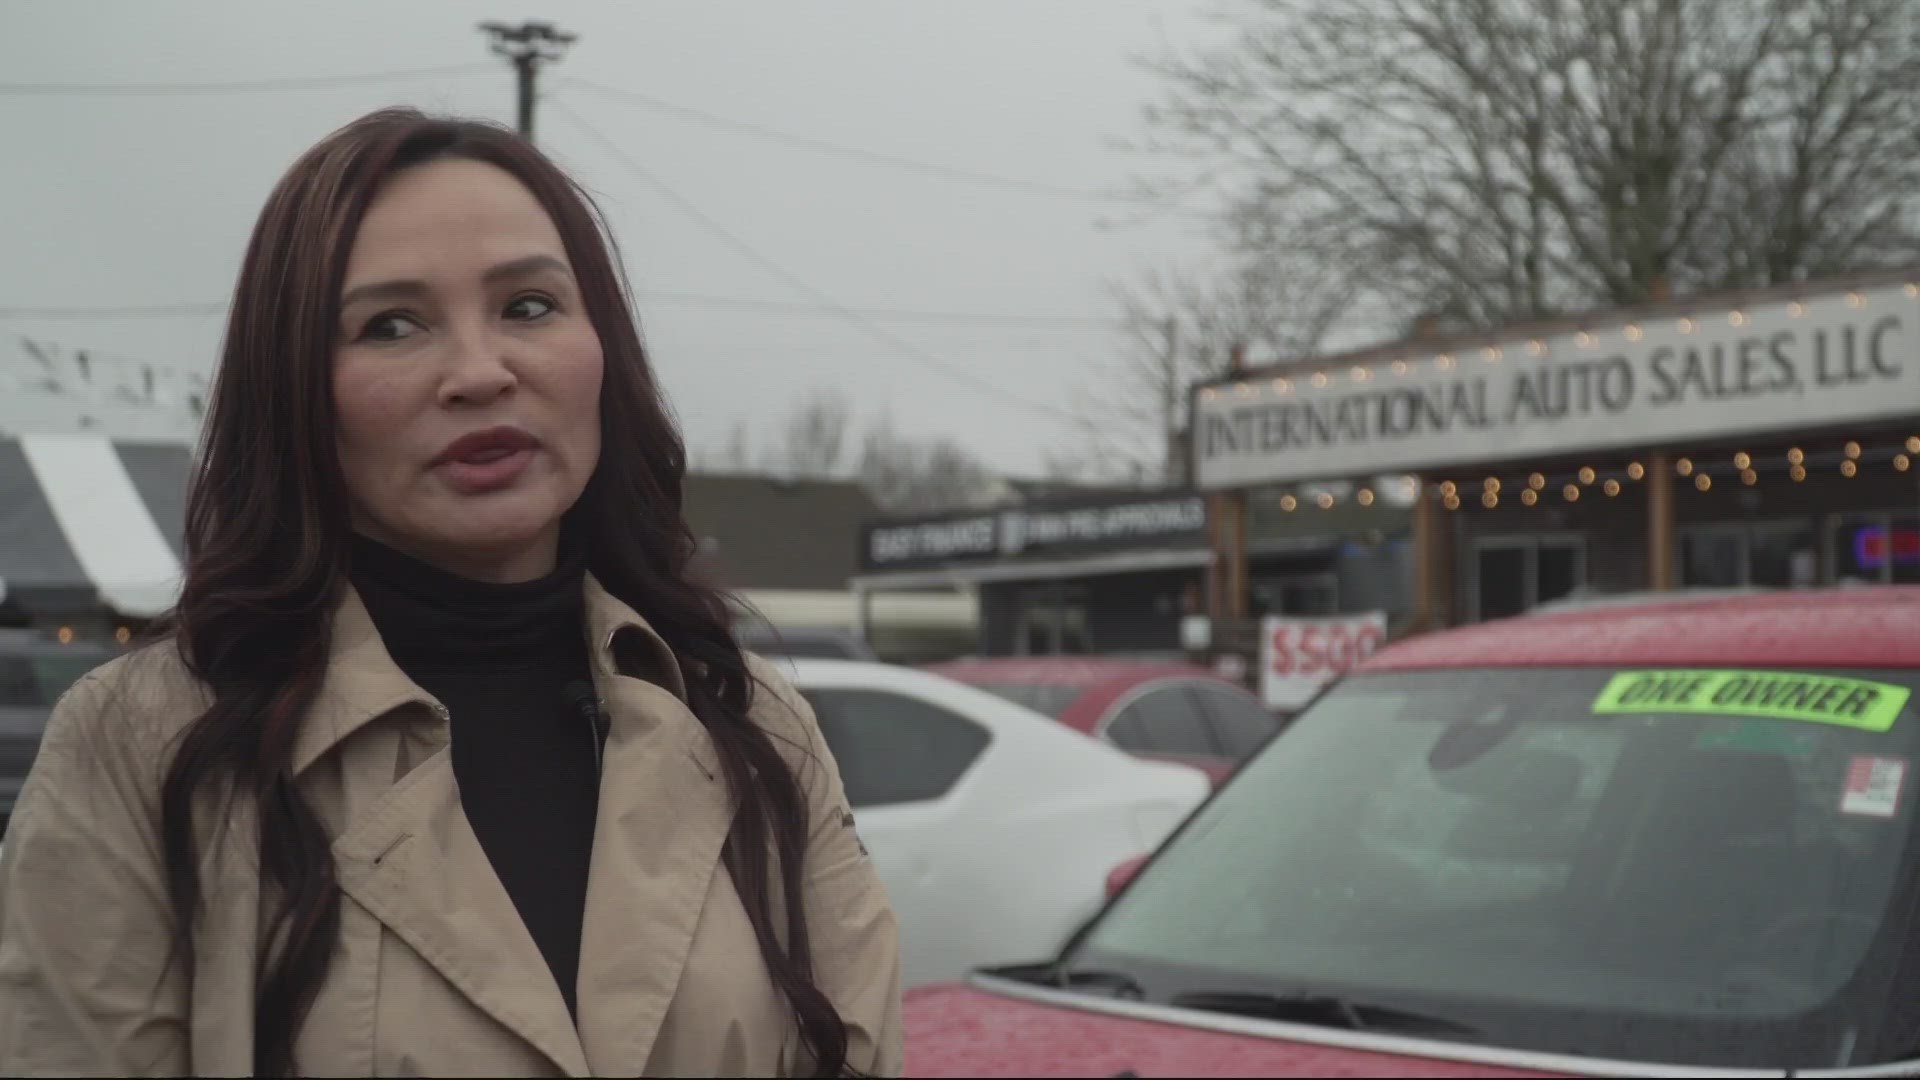 Owner of International Auto Sales on SE 82nd Avenue wants to remain in the community, but doesn't know how long she can keep taking these losses